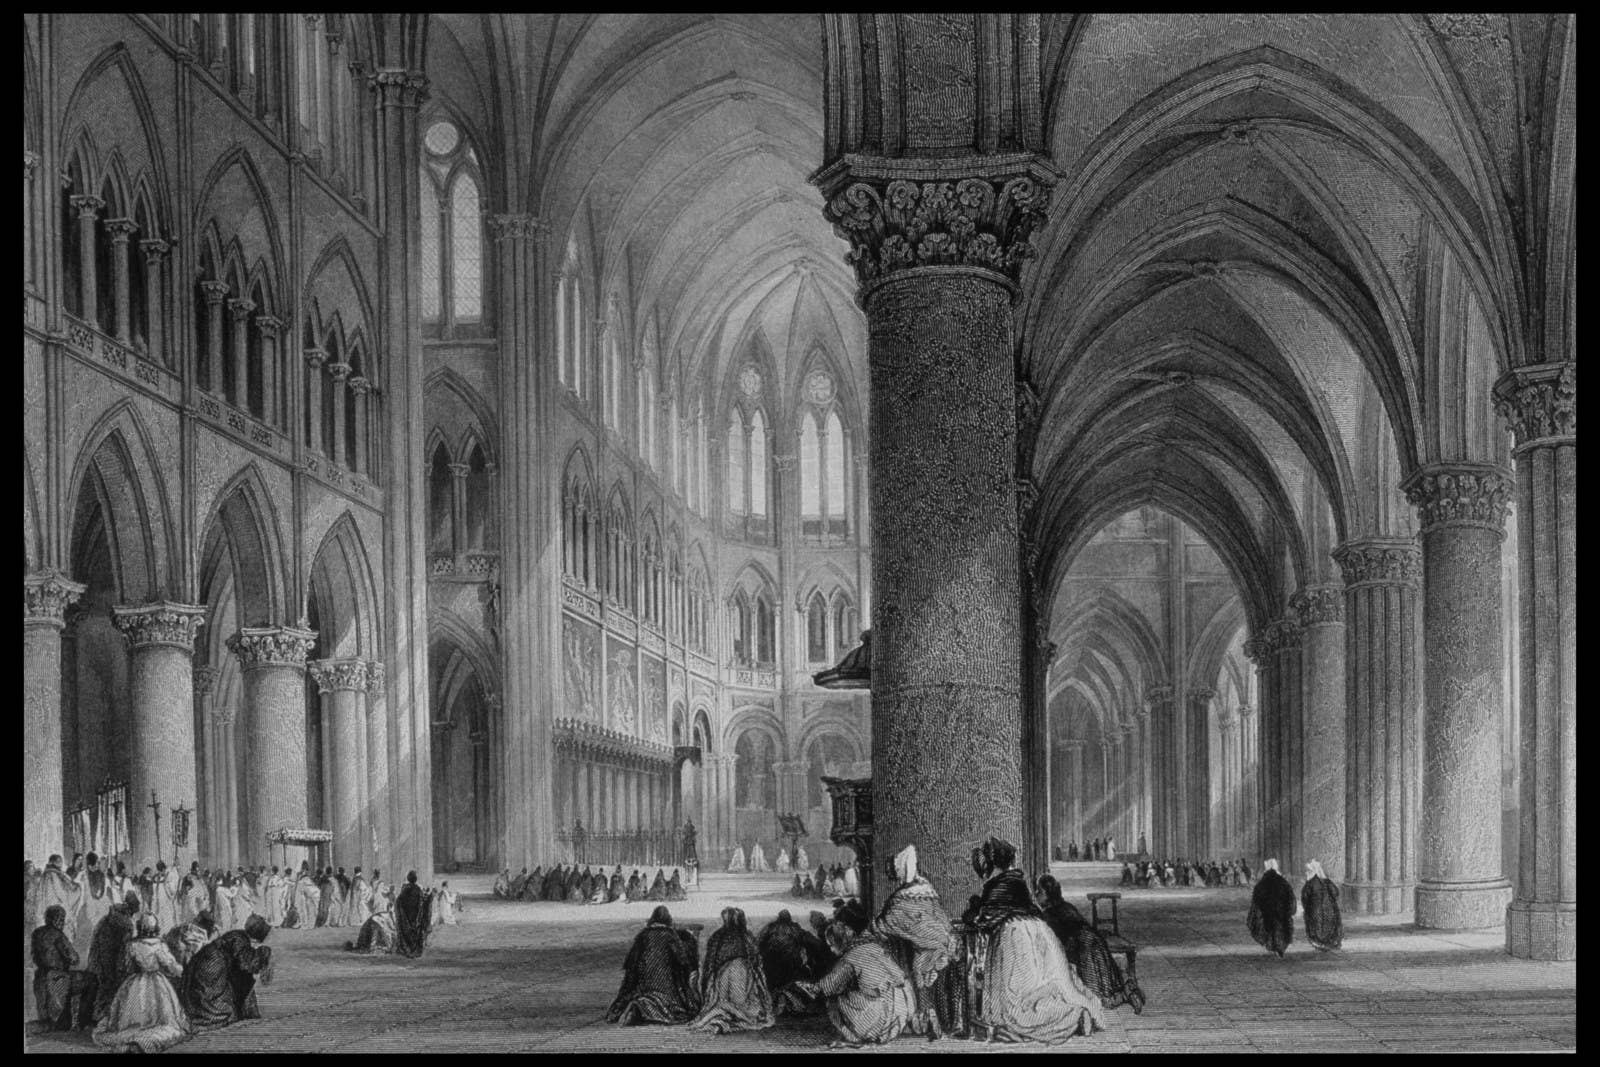 Interior of the Cathedral of Notre-Dame as drawn by Thomas Allom from France Illustrated, 1845.